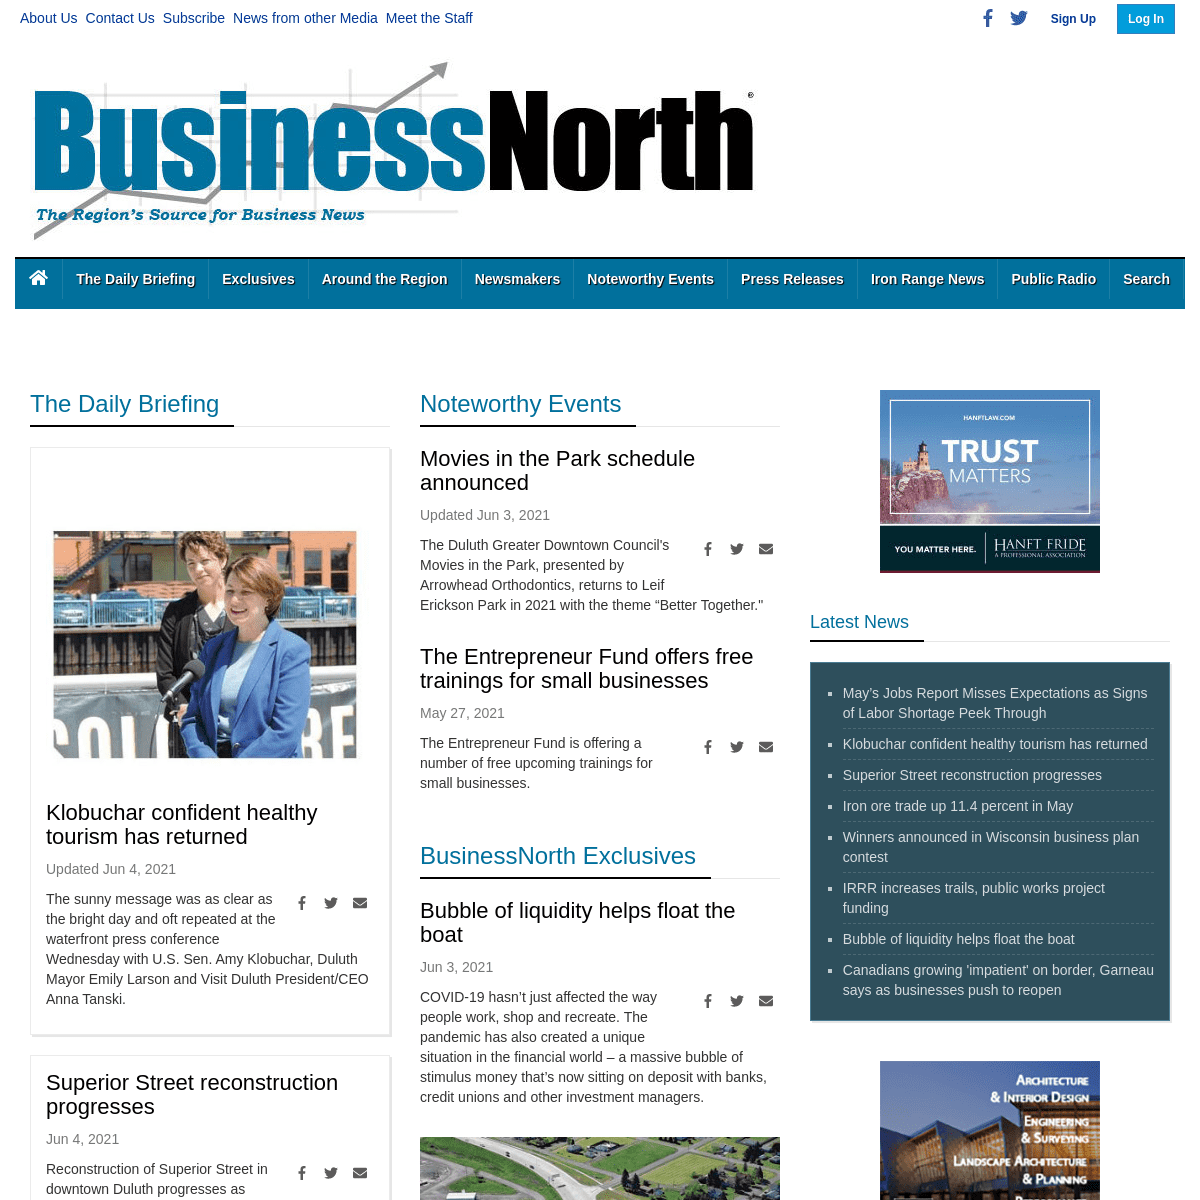 A complete backup of https://businessnorth.com